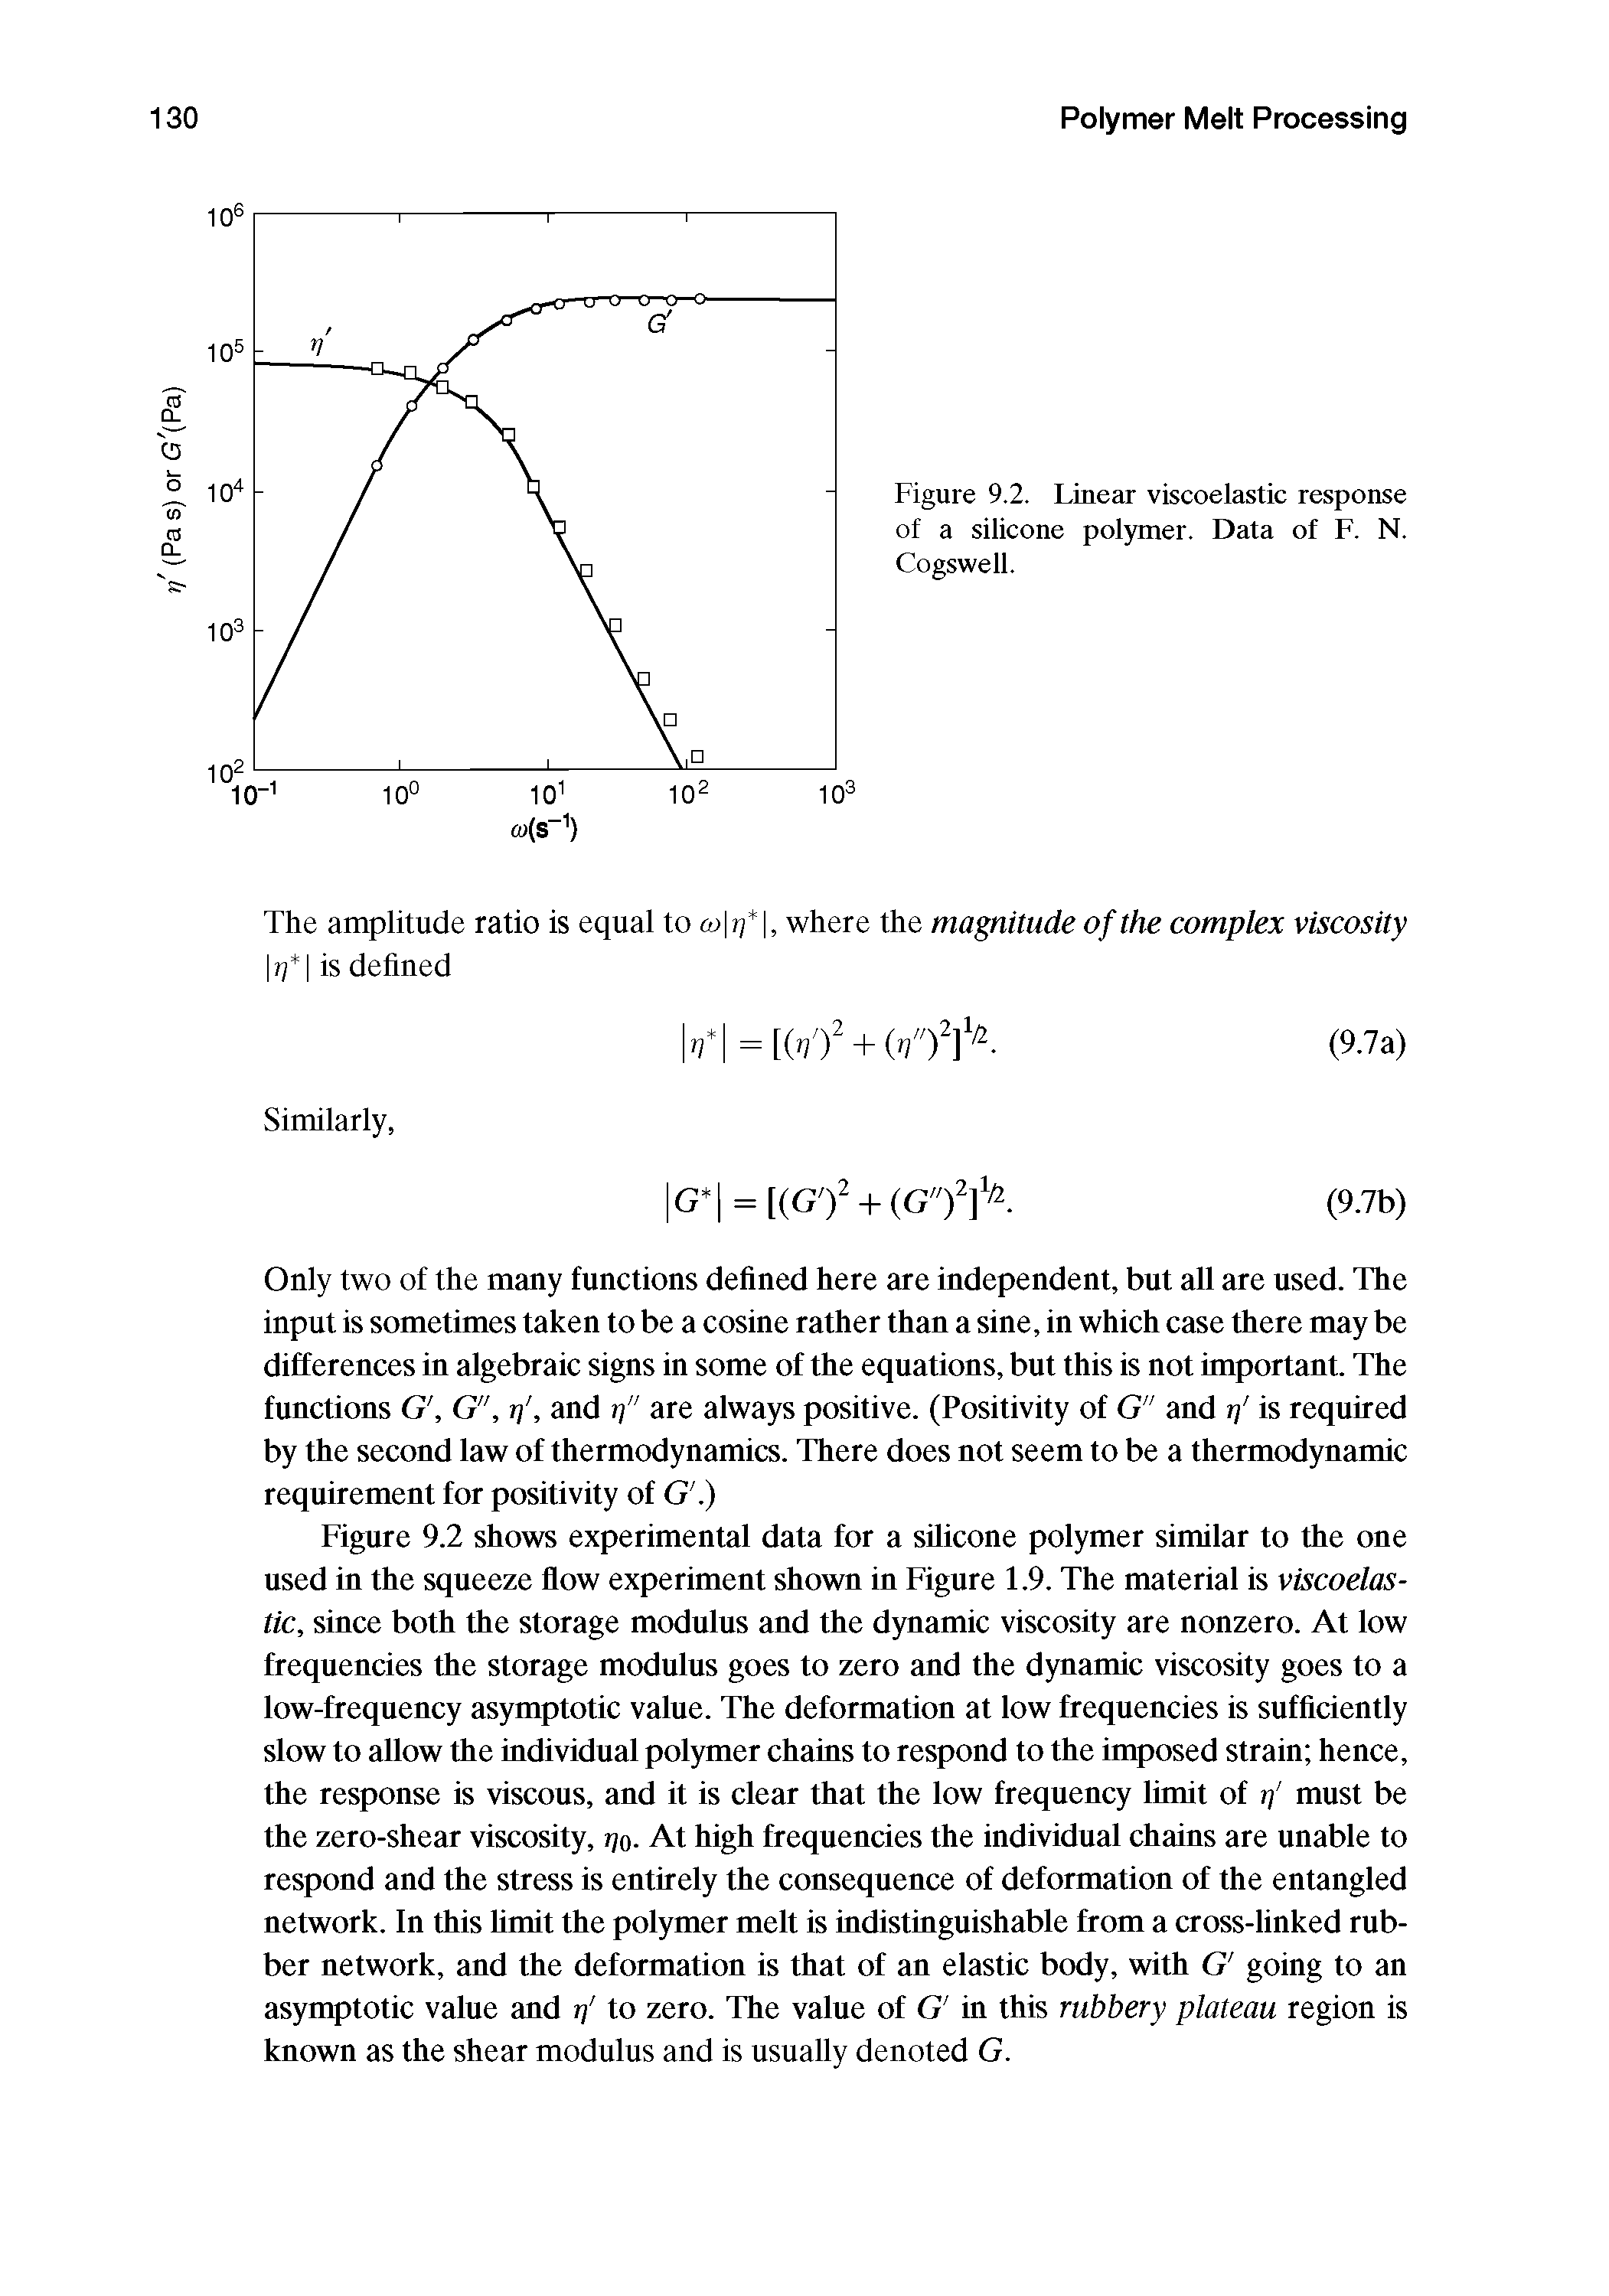 Figure 9.2 shows experimental data for a silicone polymer similar to the one used in the squeeze flow experiment shown in Figure 1.9. The material is viscoelastic, since both the storage modulus and the dynamic viscosity are nonzero. At low frequencies the storage modulus goes to zero and the dynamic viscosity goes to a low-frequency asymptotic value. The deformation at low frequencies is sufficiently slow to allow the individual polymer chains to respond to the imposed strain hence, the response is viscous, and it is clear that the low frequency limit of n must be the zero-shear viscosity, t]q. At high frequencies the individual chains are unable to respond and the stress is entirely the consequence of deformation of the entangled network. In this limit the polymer melt is indistinguishable from a cross-linked rubber network, and the deformation is that of an elastic body, with G going to an asymptotic value and rj to zero. The value of G in this rubbery plateau region is known as the shear modulus and is usually denoted G.